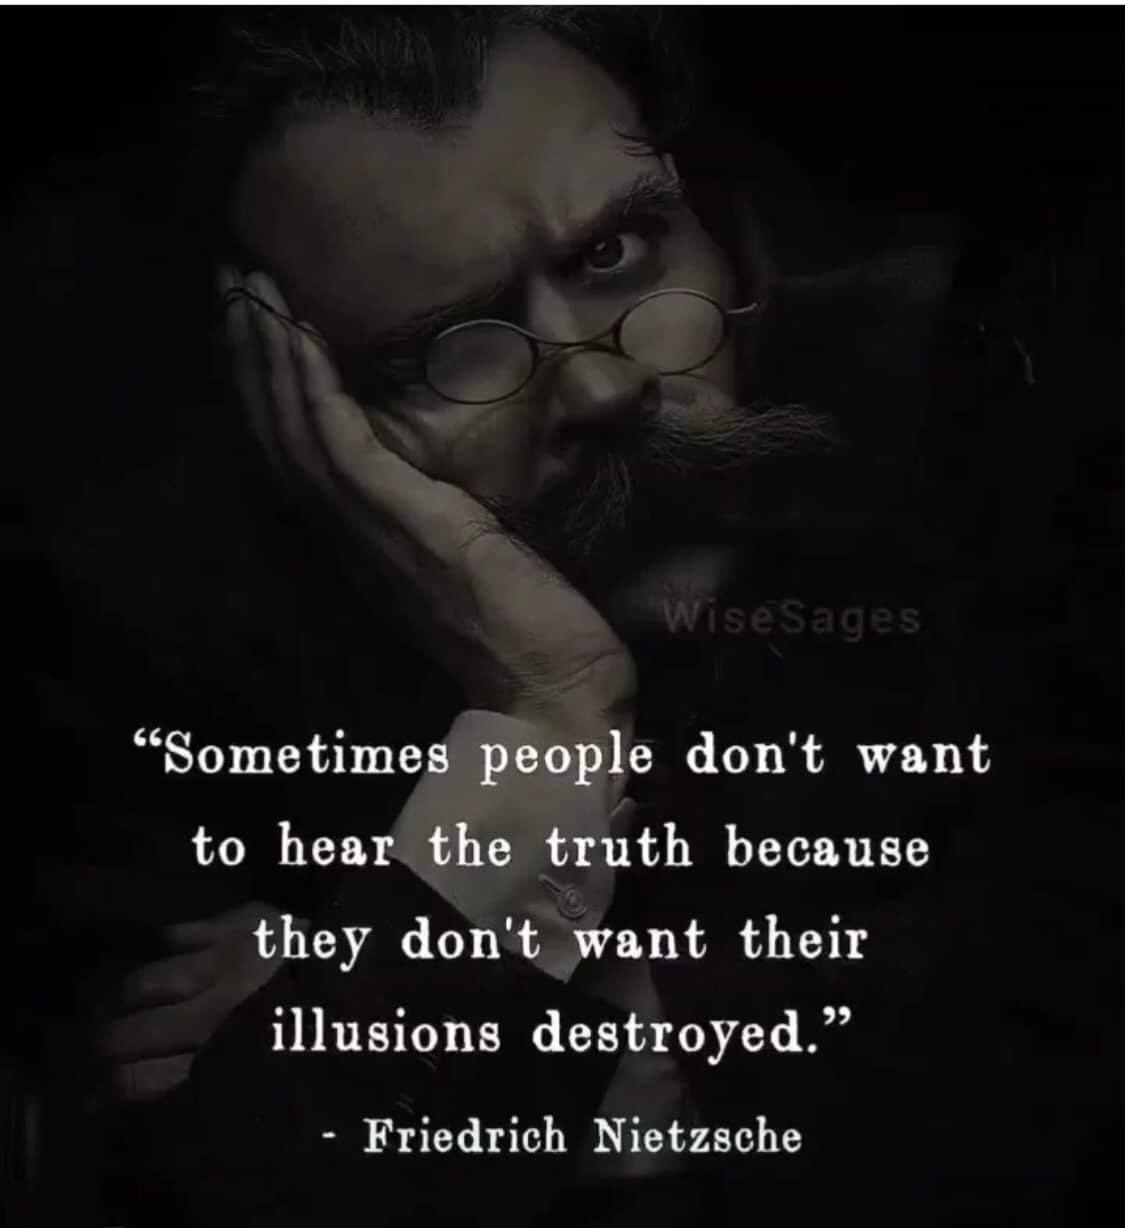 Sometimes people don’t want to hear the truth because they don’t want their illusions destroyed. – Friedrich Nietzsche